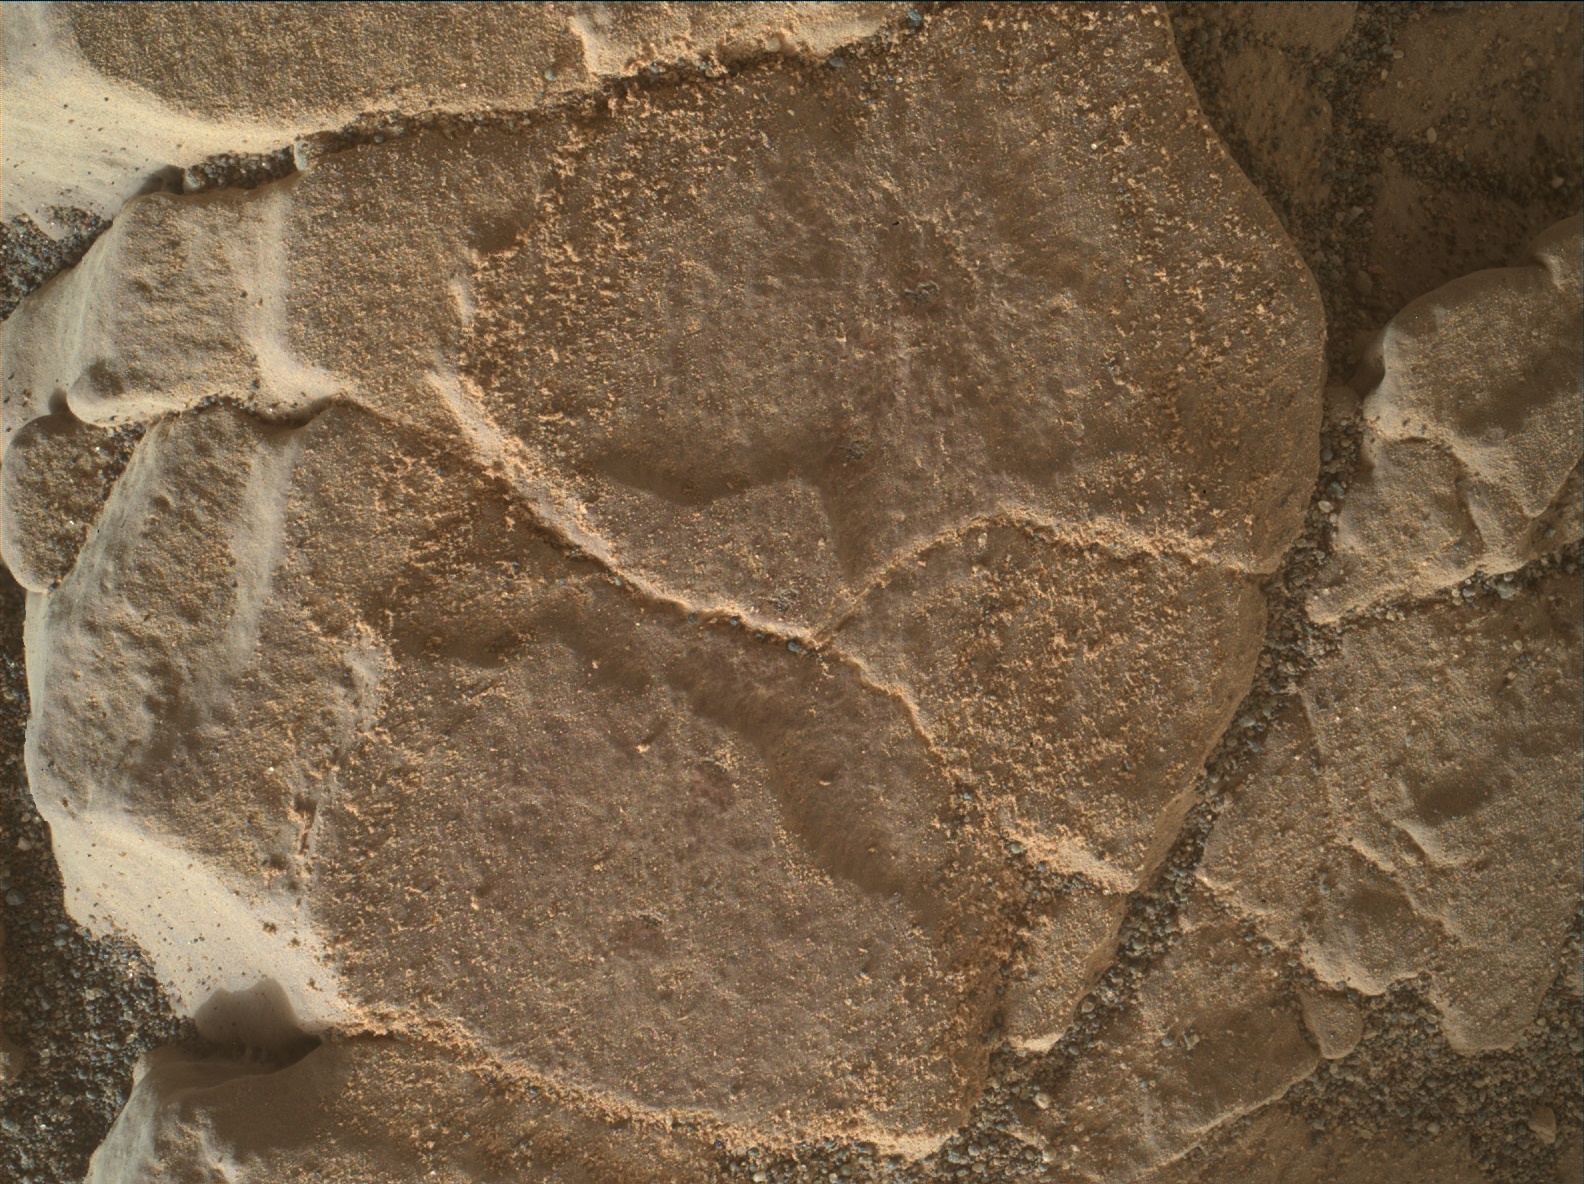 Nasa's Mars rover Curiosity acquired this image using its Mars Hand Lens Imager (MAHLI) on Sol 2466